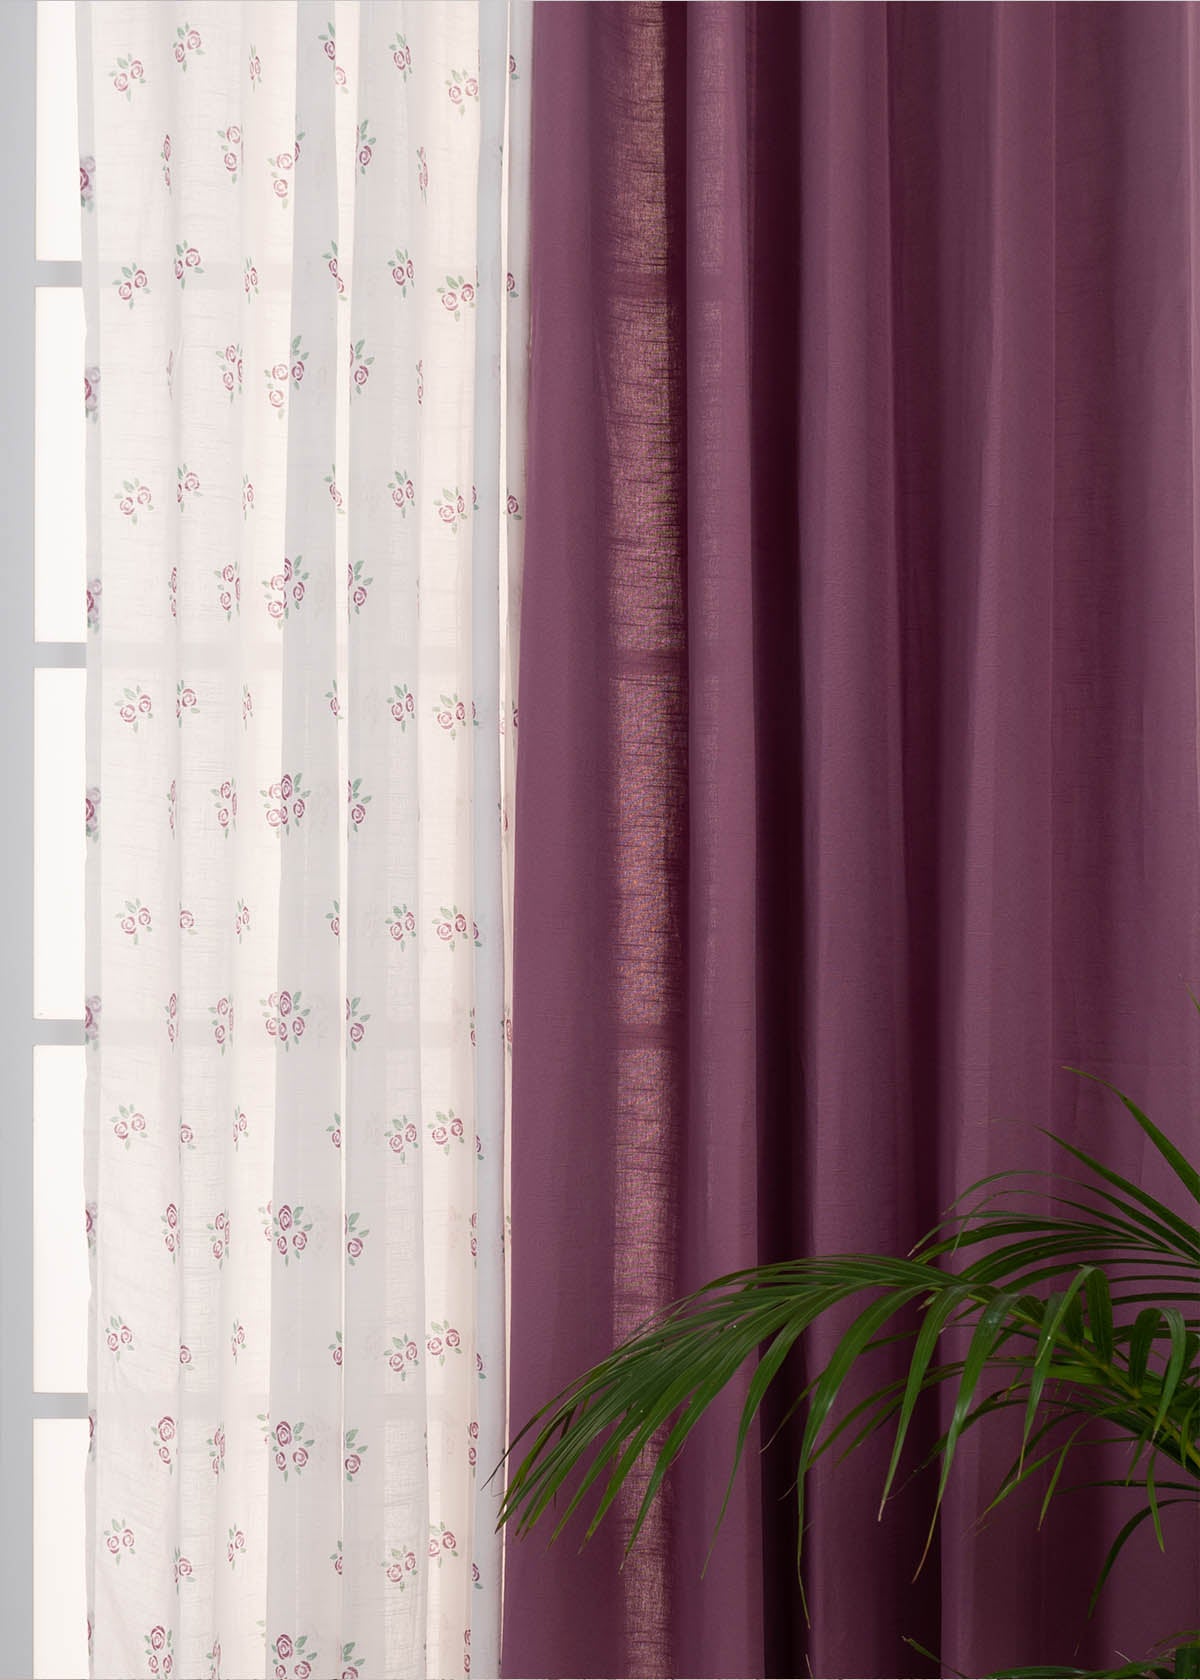 Grape Solid, Rose Garden Sheer Set of 4 Combo Cotton Curtain - Lavender